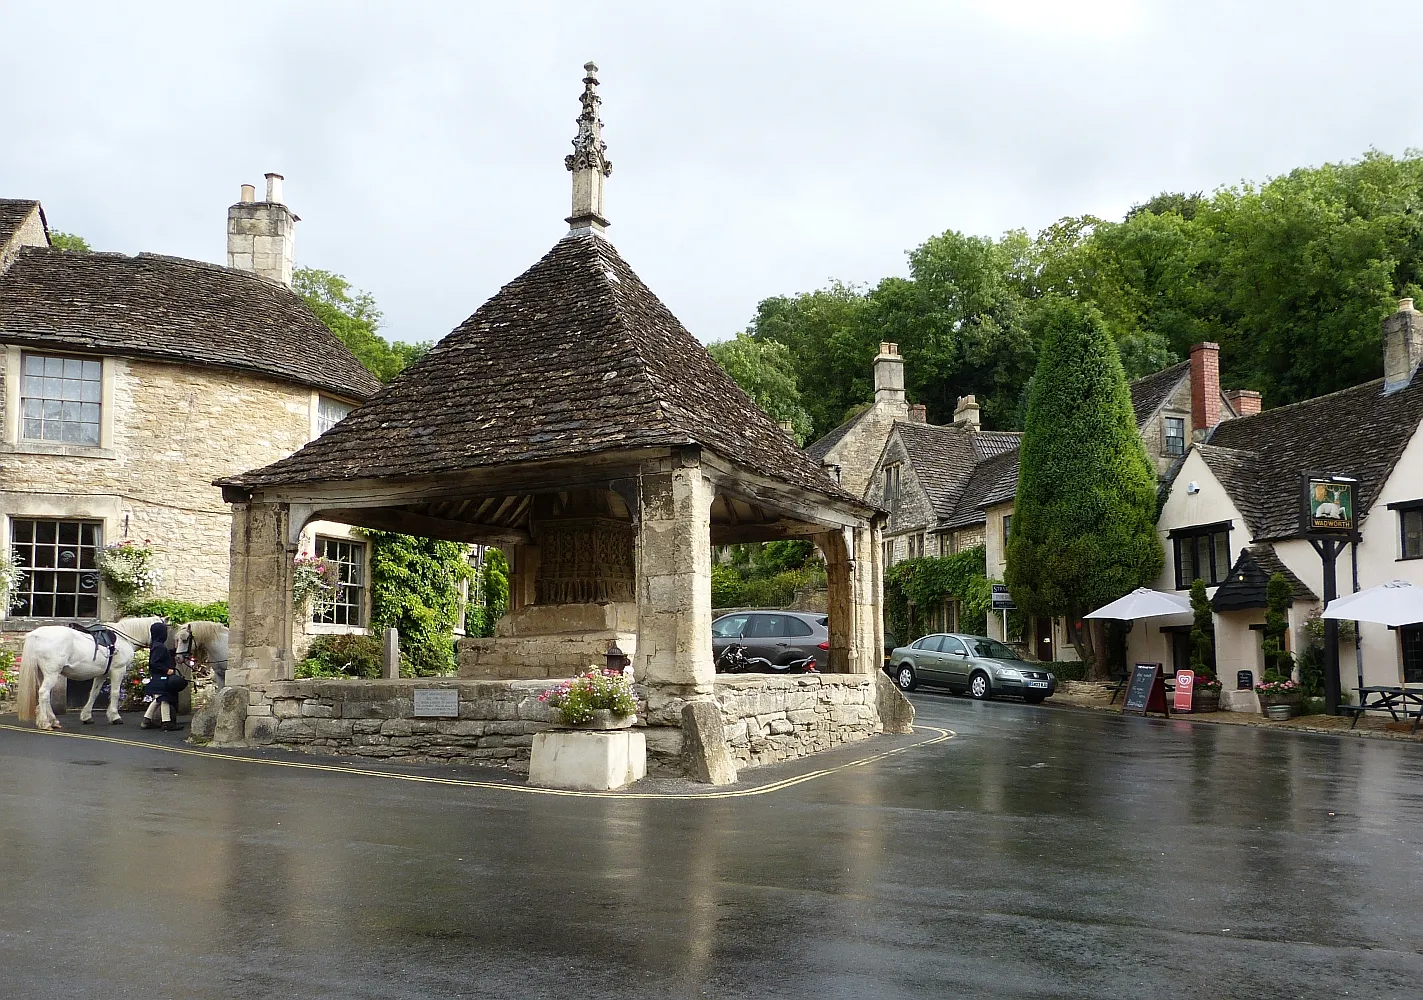 Photo showing: Castle Combe, Butter Cross in The Street. The fourteenth century Market Cross is housed beneath the Butter Cross in the centre of the highly picturesque village of Castle Combe (see shared description). Behind the cross (and behind the ponies) is part of the Castle Inn while the village's other pub, The White Hart can be seen on the right.